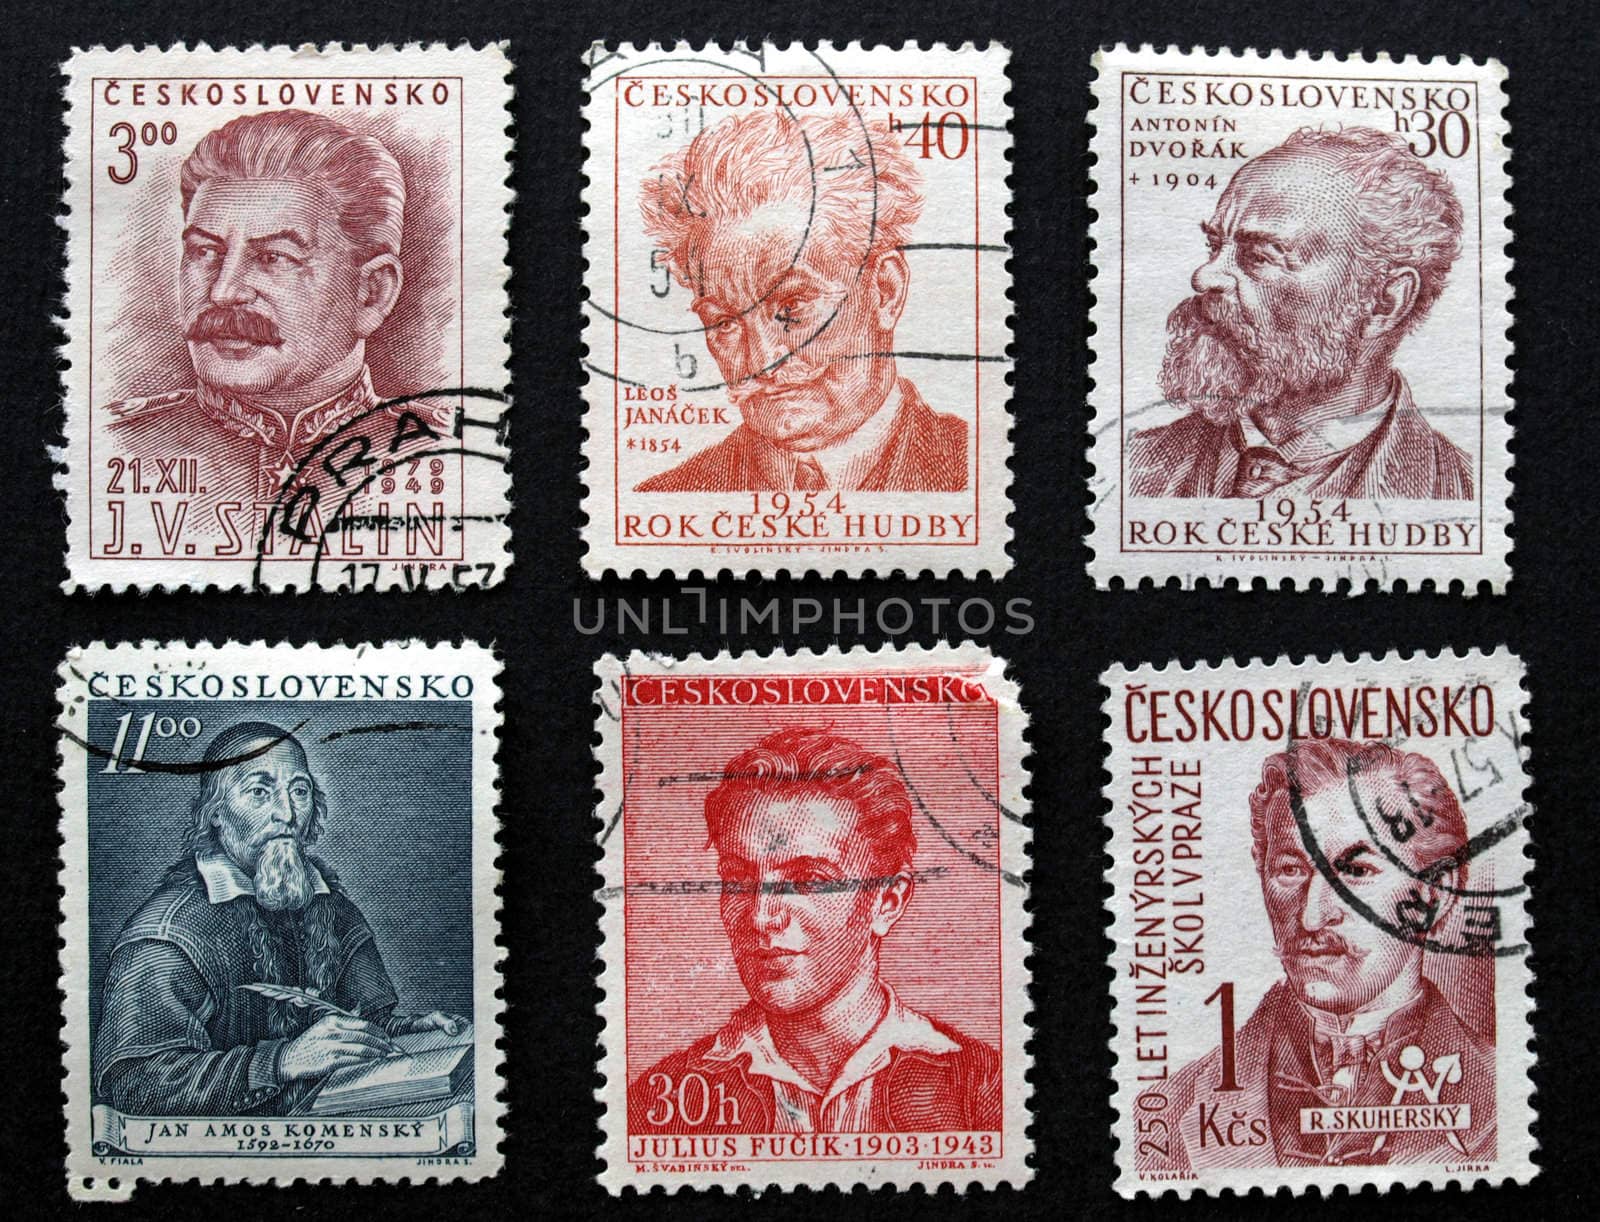 Stamps of the Czech Republic